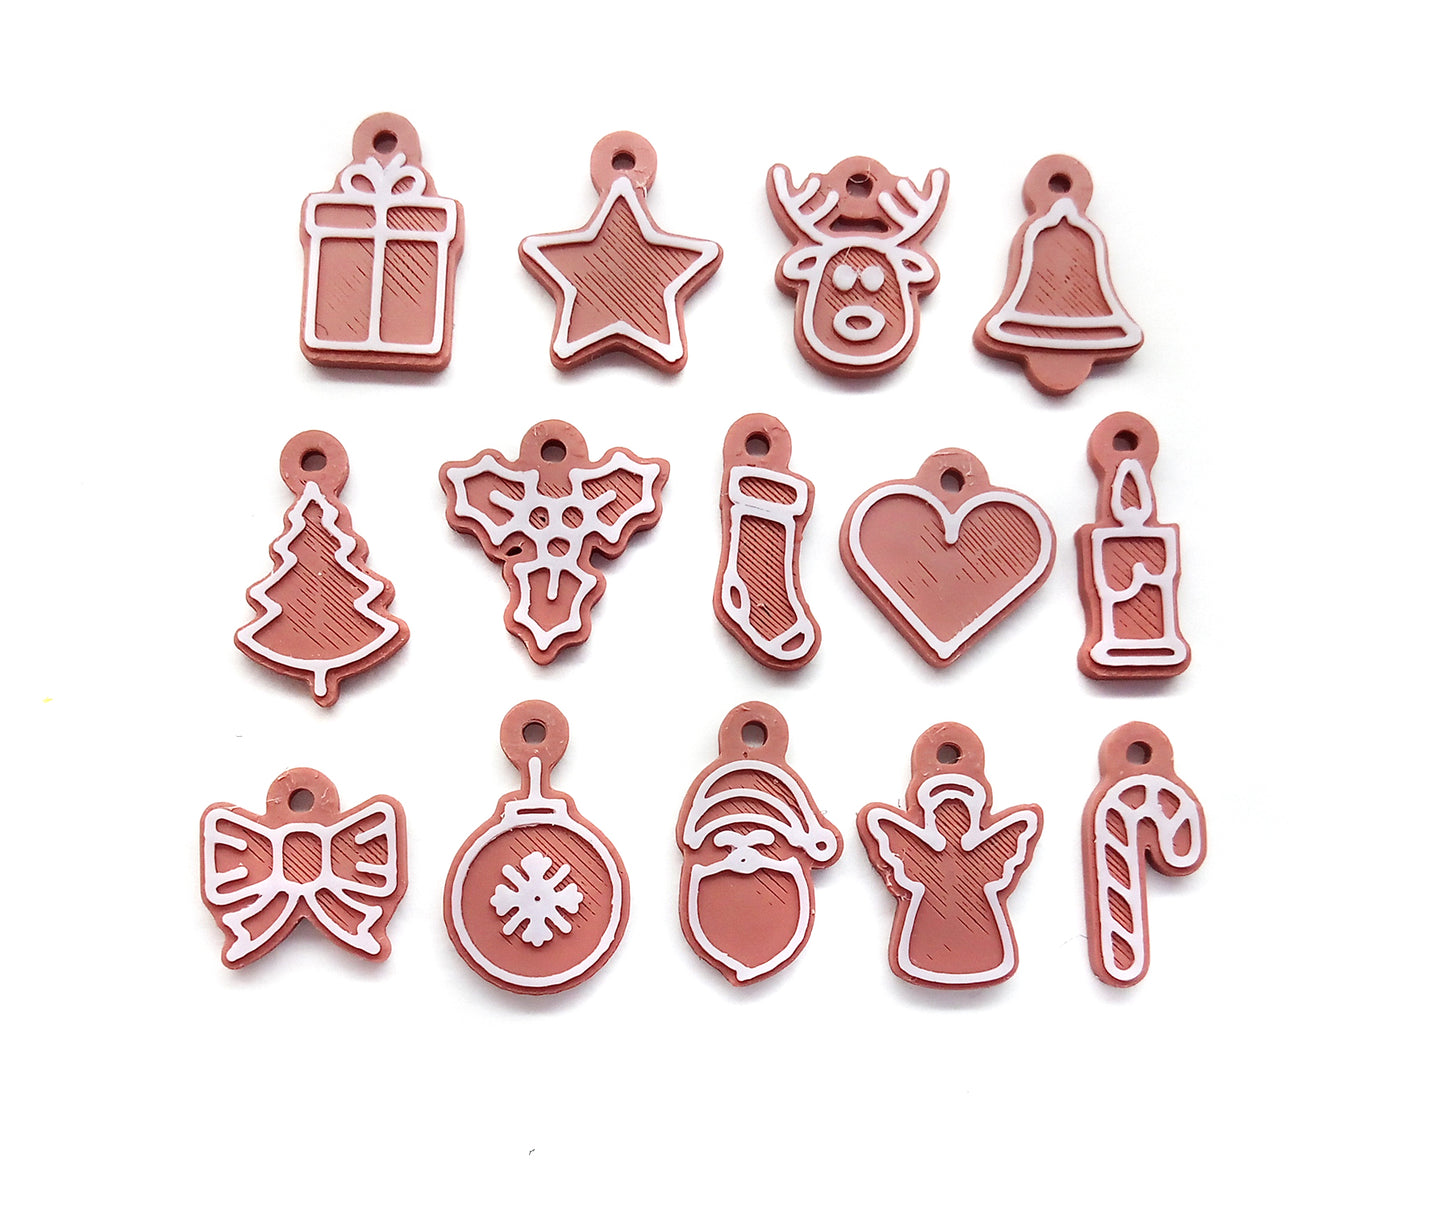 Tiny Christmas Ornament Set, 14 pc Cute Mini Gingerbread Cookie Baubles, 1/2 inch long